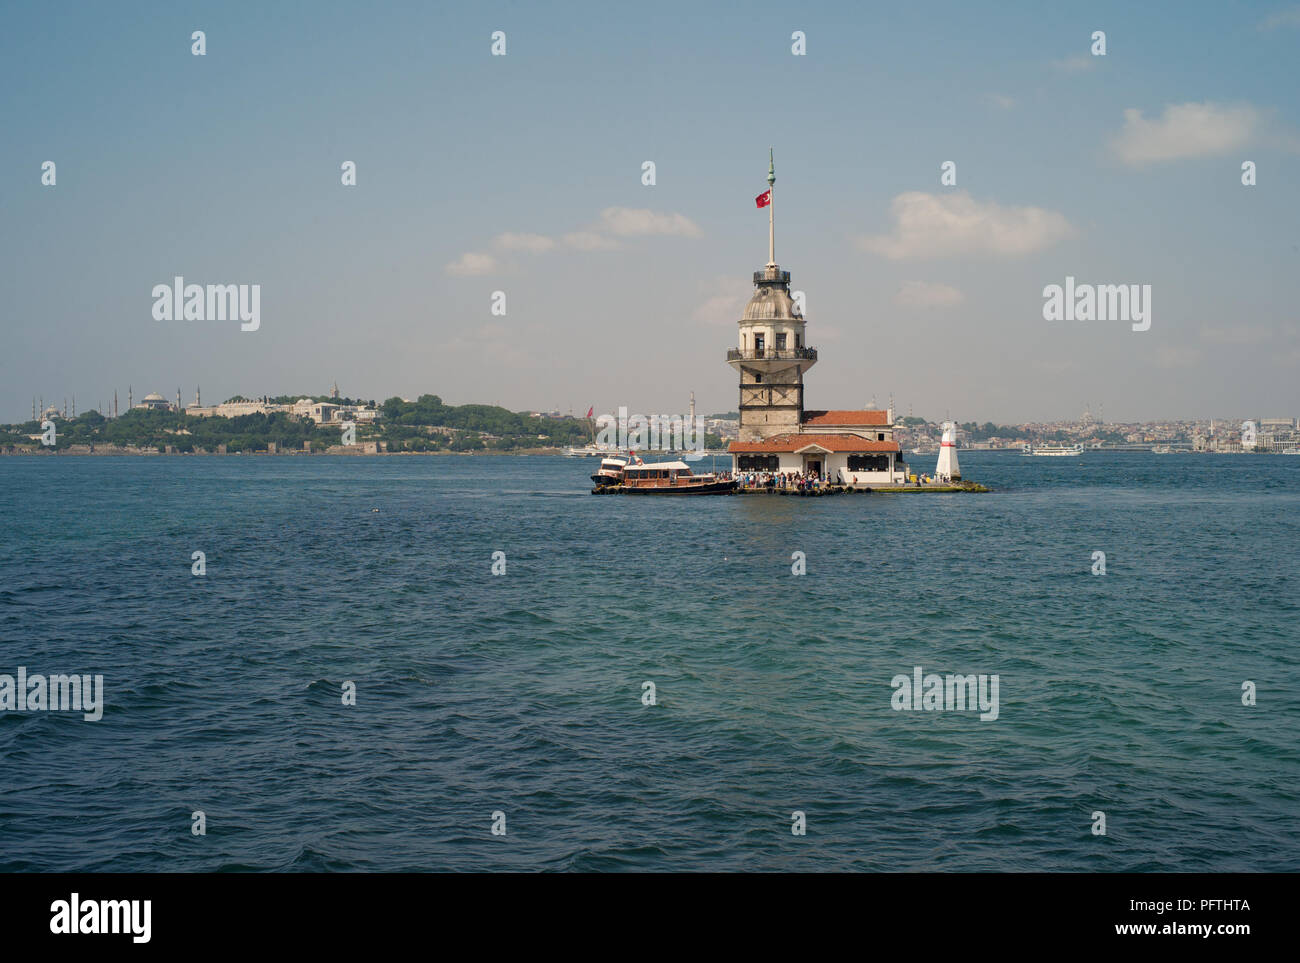 Maiden's Tower, also known as Kiz Kulesi, Leander's Tower or Tower of Leandros at the Entrance of the Bosphorus Strait in Istanbul, Turkey Stock Photo